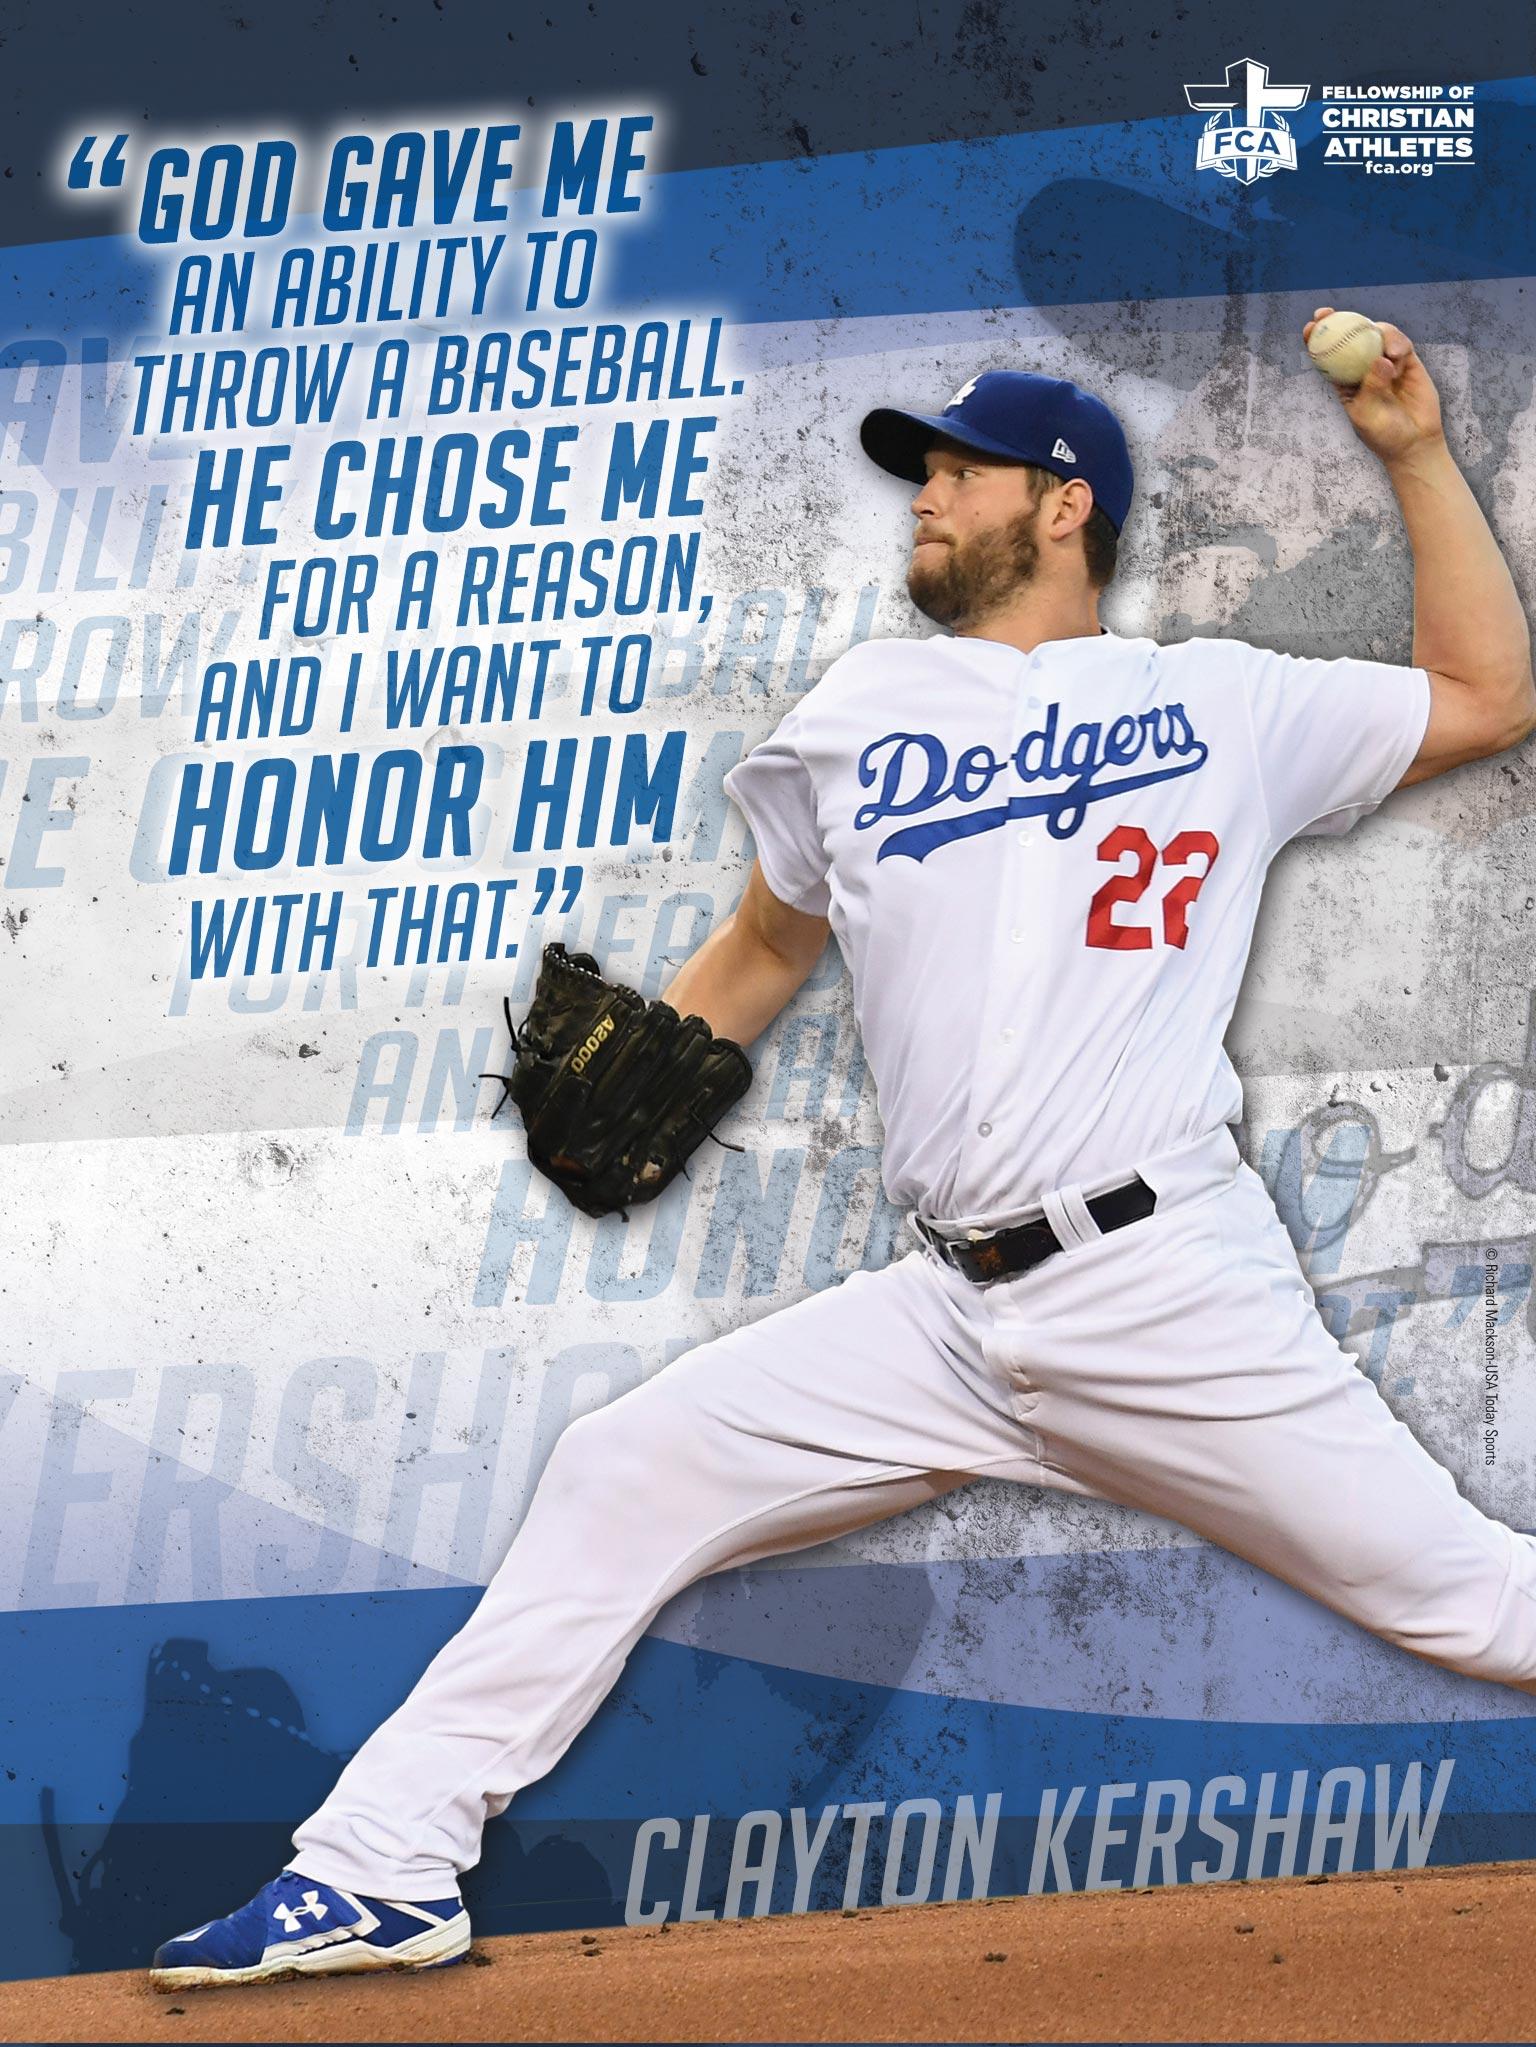 Clayton Kershaw Fca Resources For Your